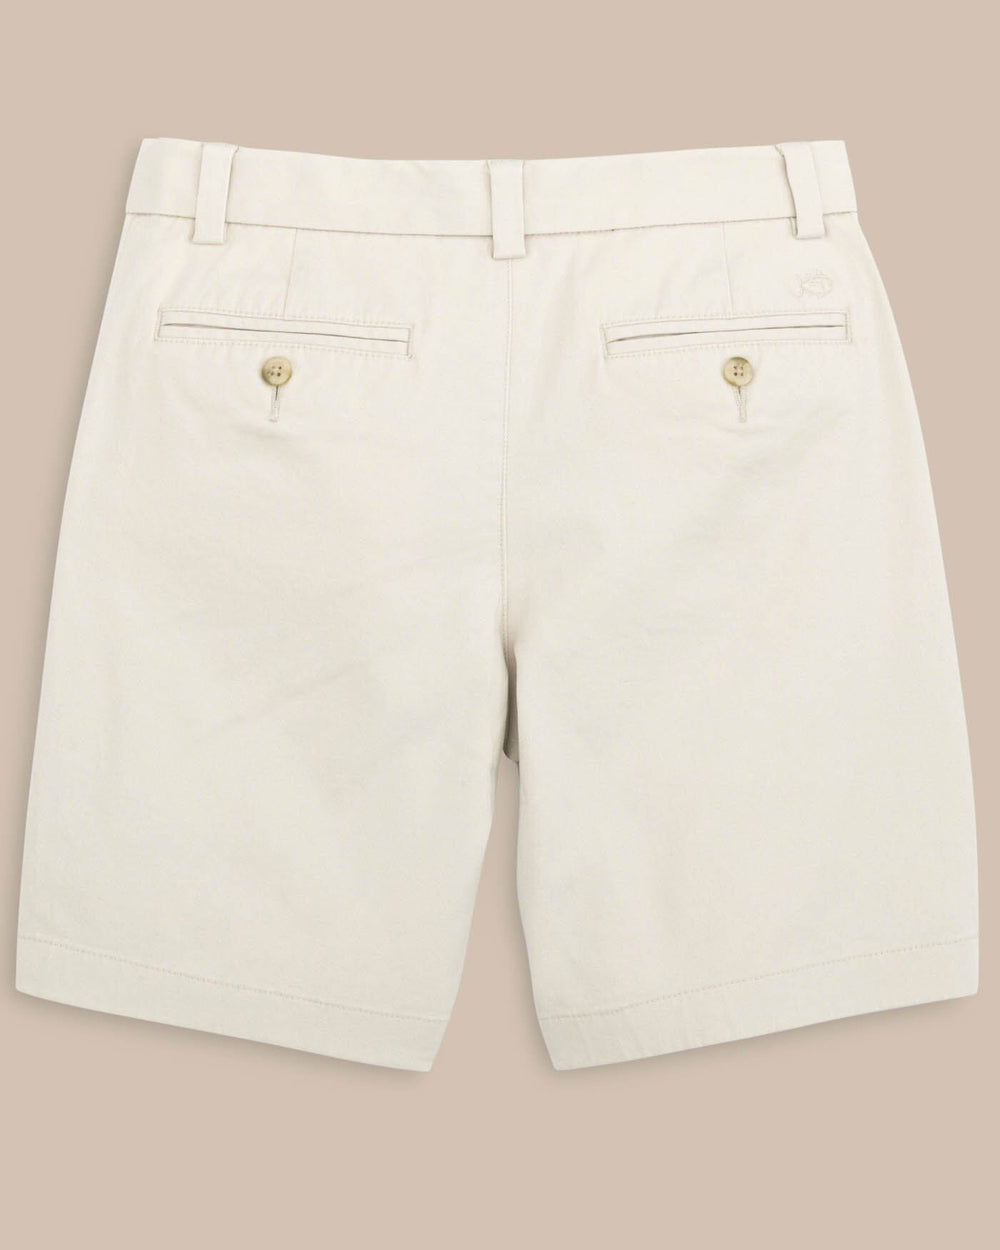 The back view of the Boys Channel Marker Short by Southern Tide - Light Khaki